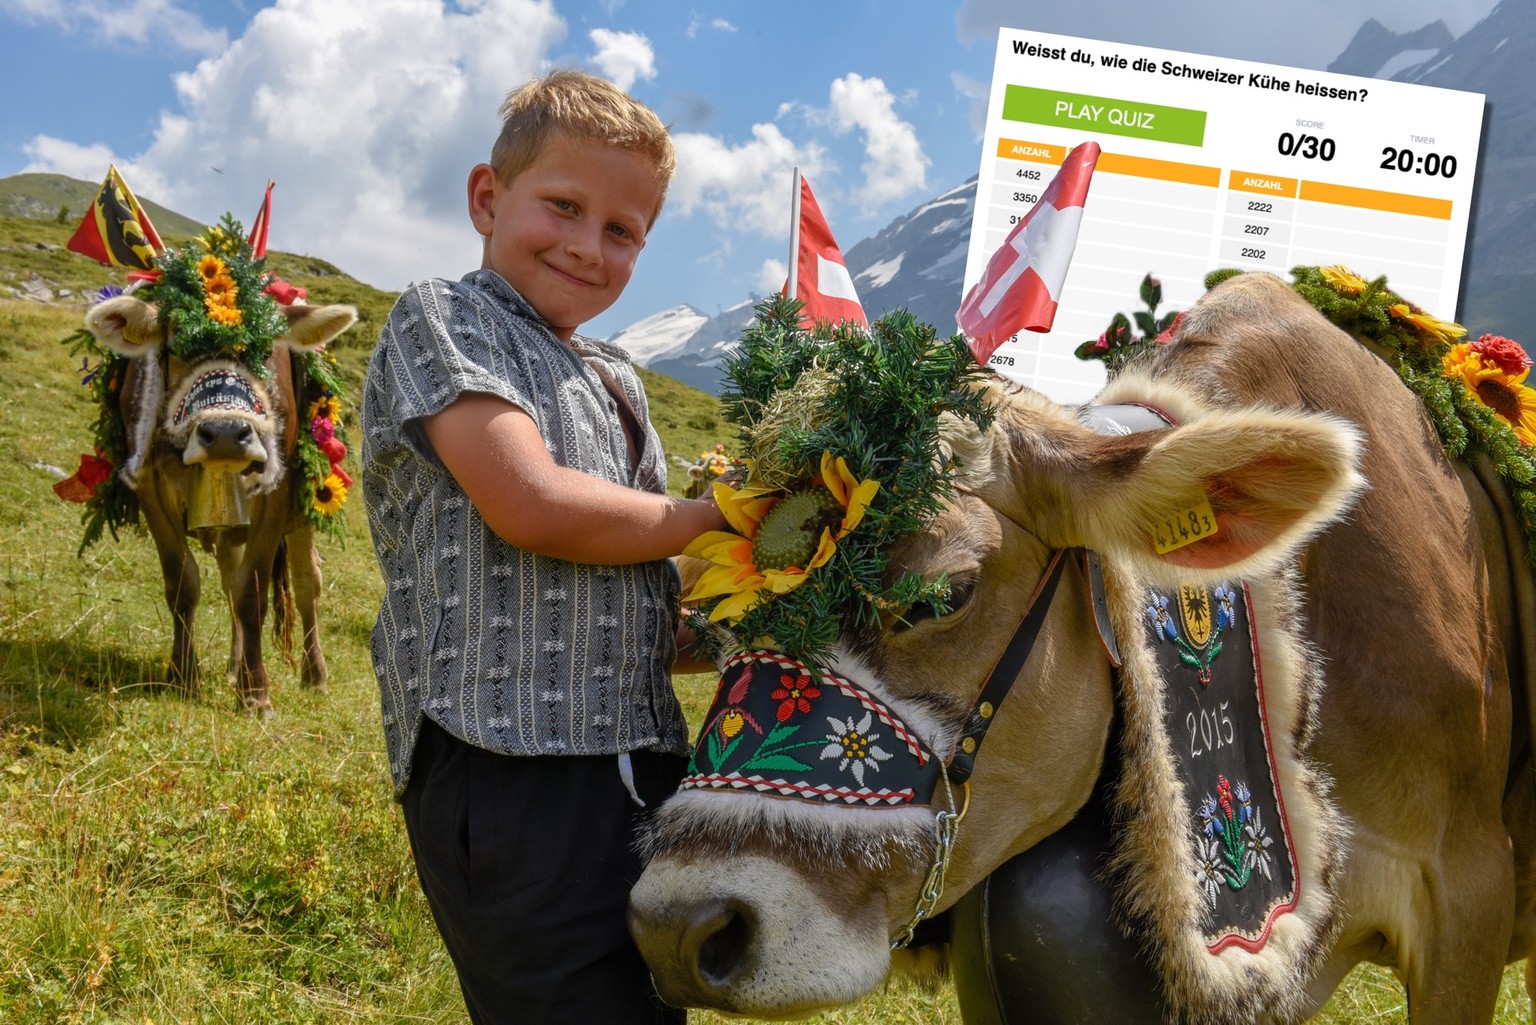 Engstlenalp, Switzerland - 4 August 2018: cow decorated with flowers and flags on the annual transhumance at Engstlenalp on the Swiss alps